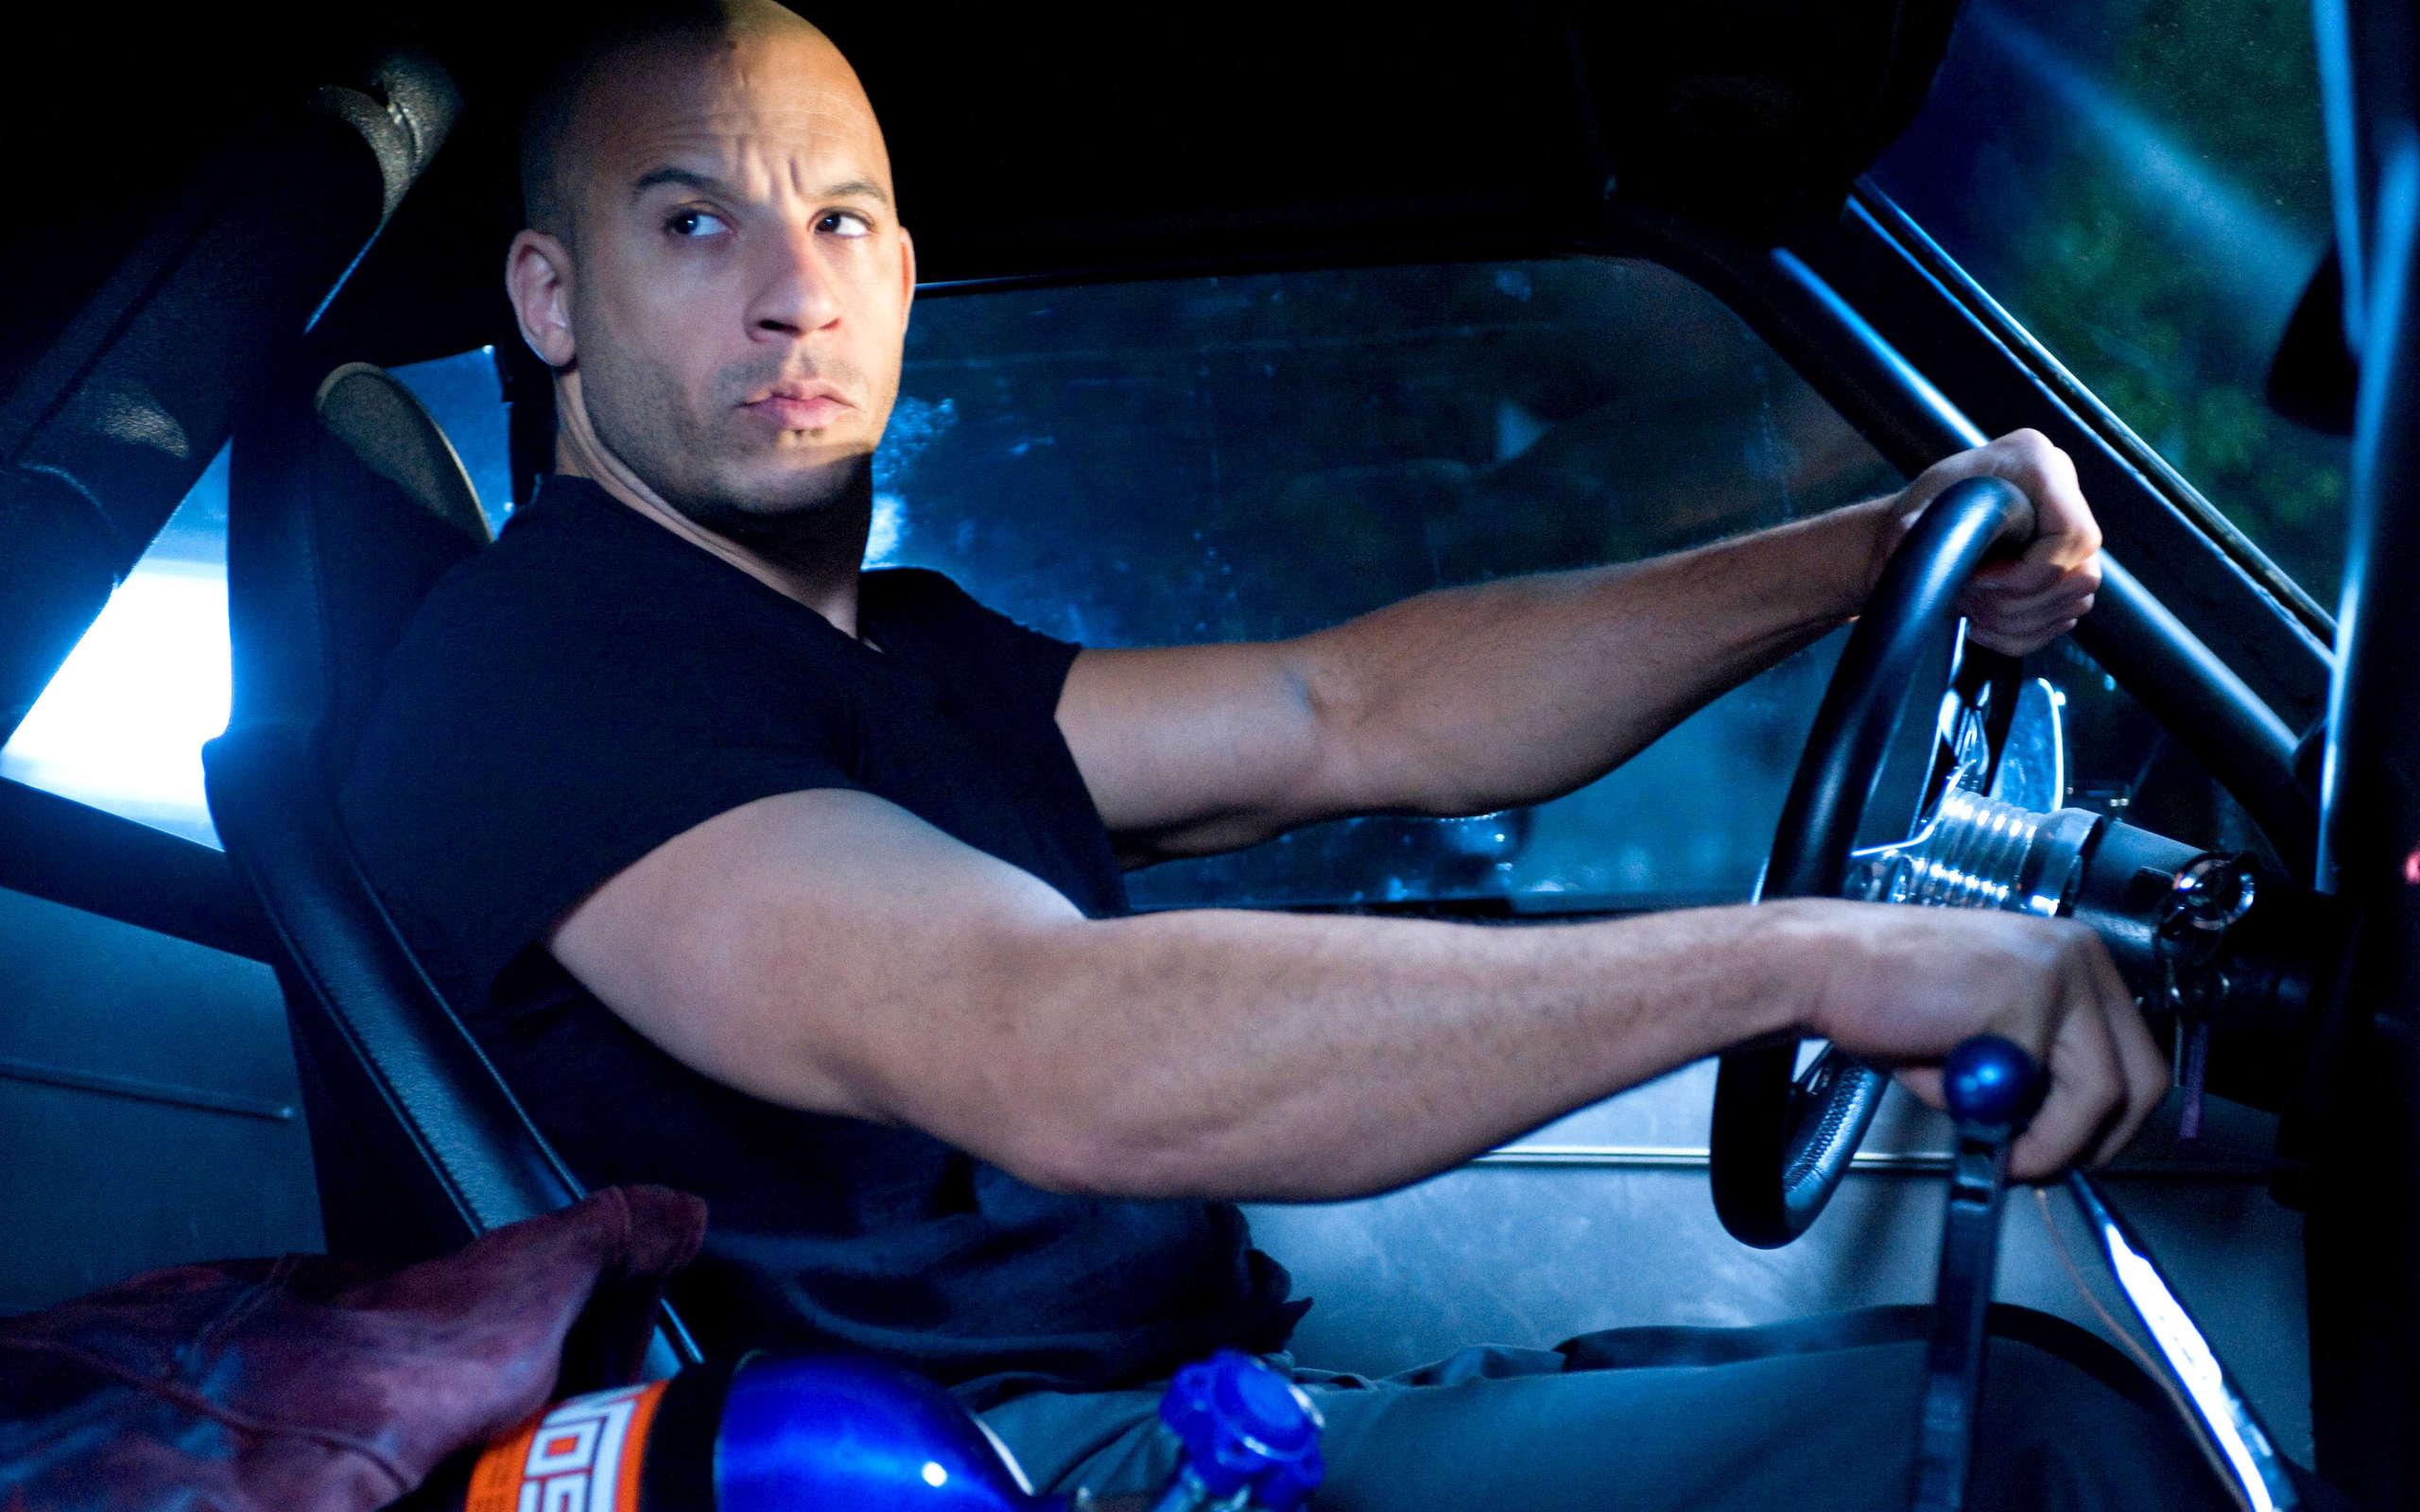 Wallpaper For > Fast And Furious 3 Wallpaper